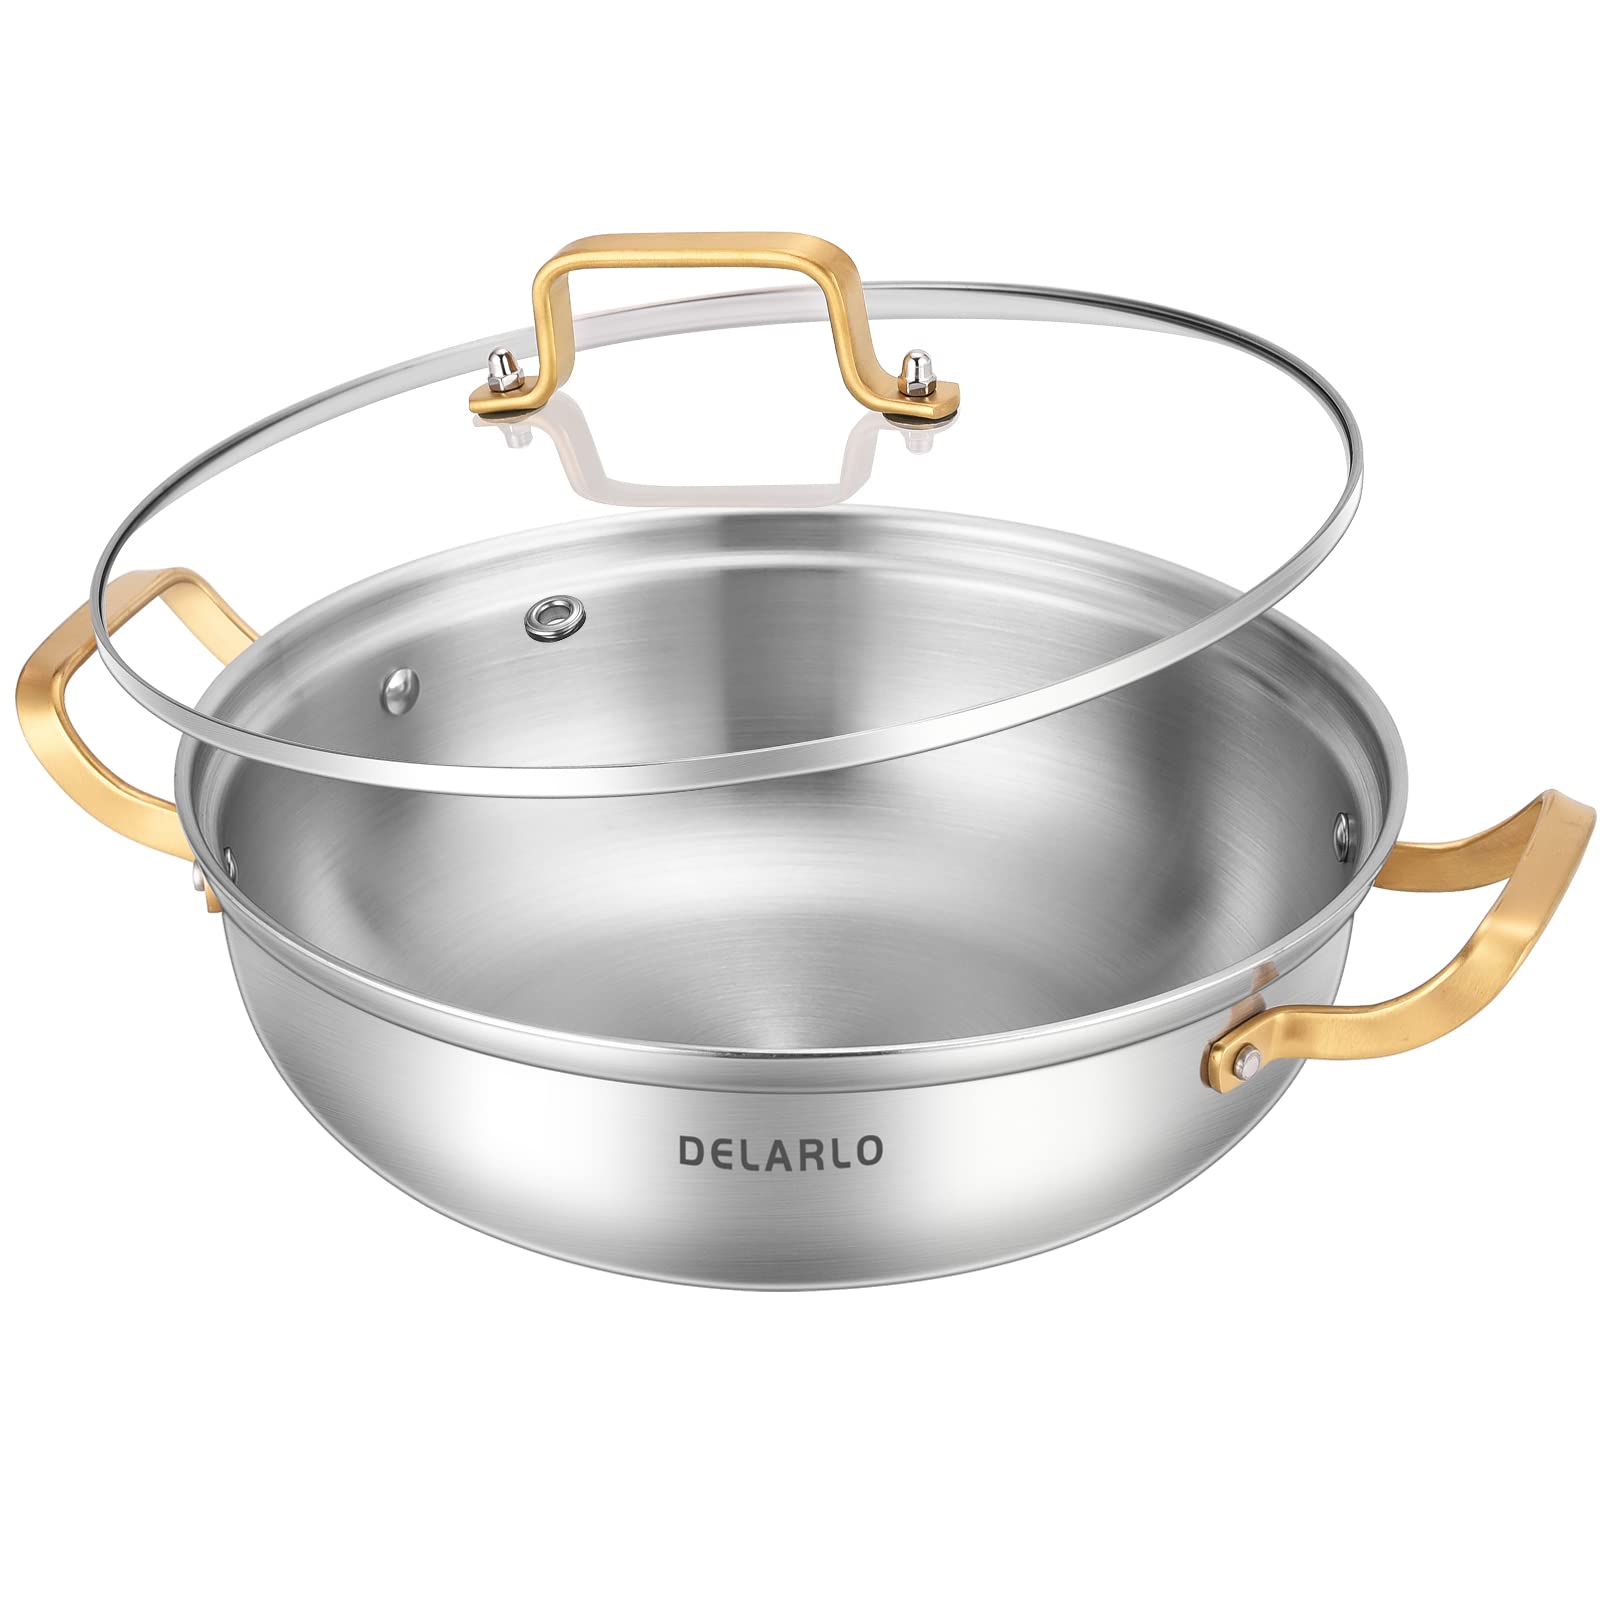 Delarlo Tri-Ply Stainless Steel Cookware Everyday Pan with Glass Lid 12inch, 4QT Chef’Pan,Induction Cooking Pot, kitchen Stock Pot,Fry Pan,Multipurpose Stewpot